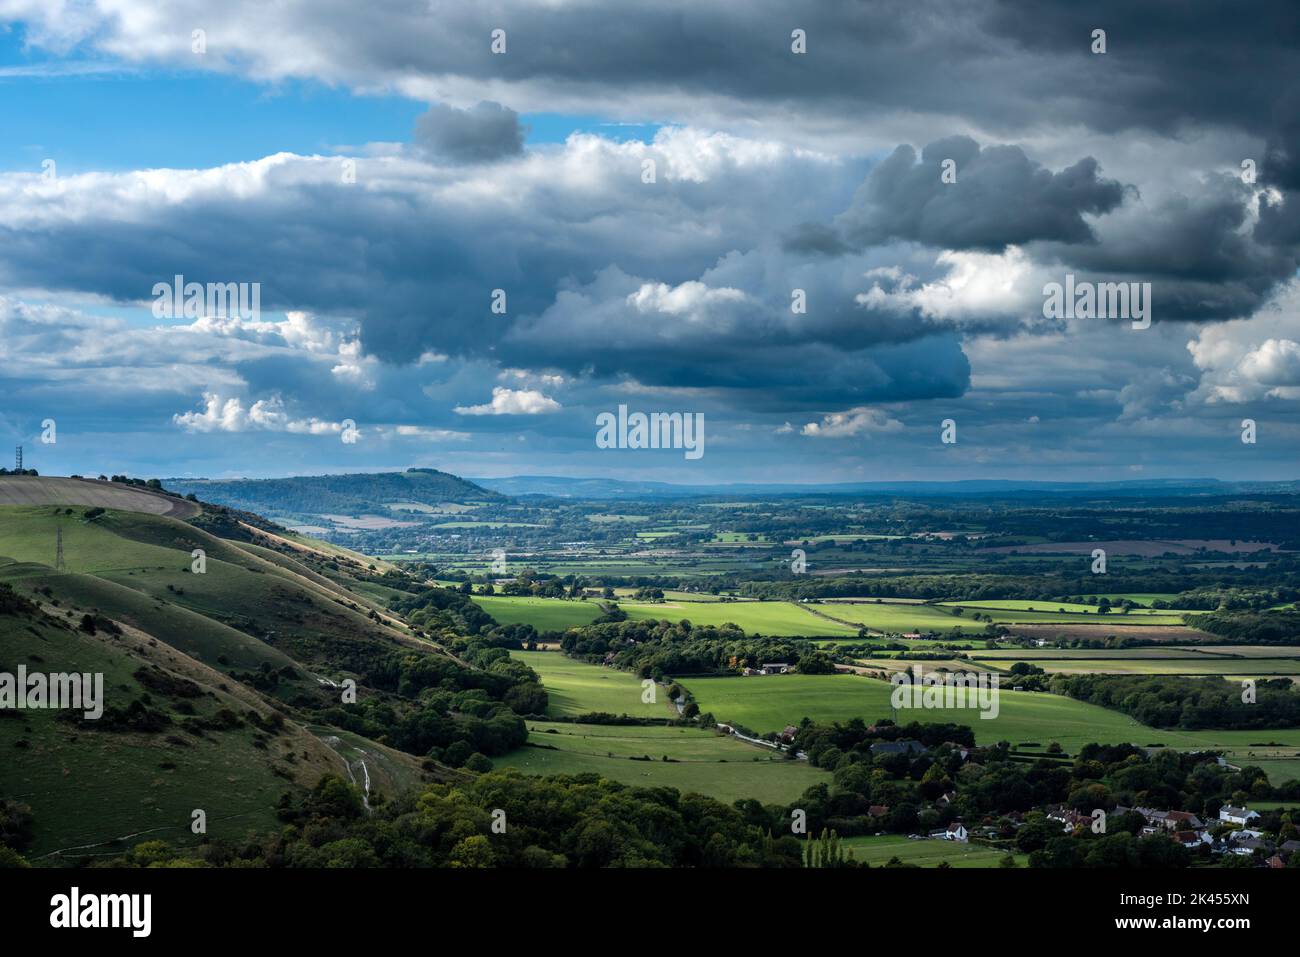 Brighton, September 29th 2022: Cumulonimbus clouds gather over the South Downs National Park at Devil's Dyke, overlooking the Fulking Escarpment and the Weald of Sussex as the season changes Stock Photo